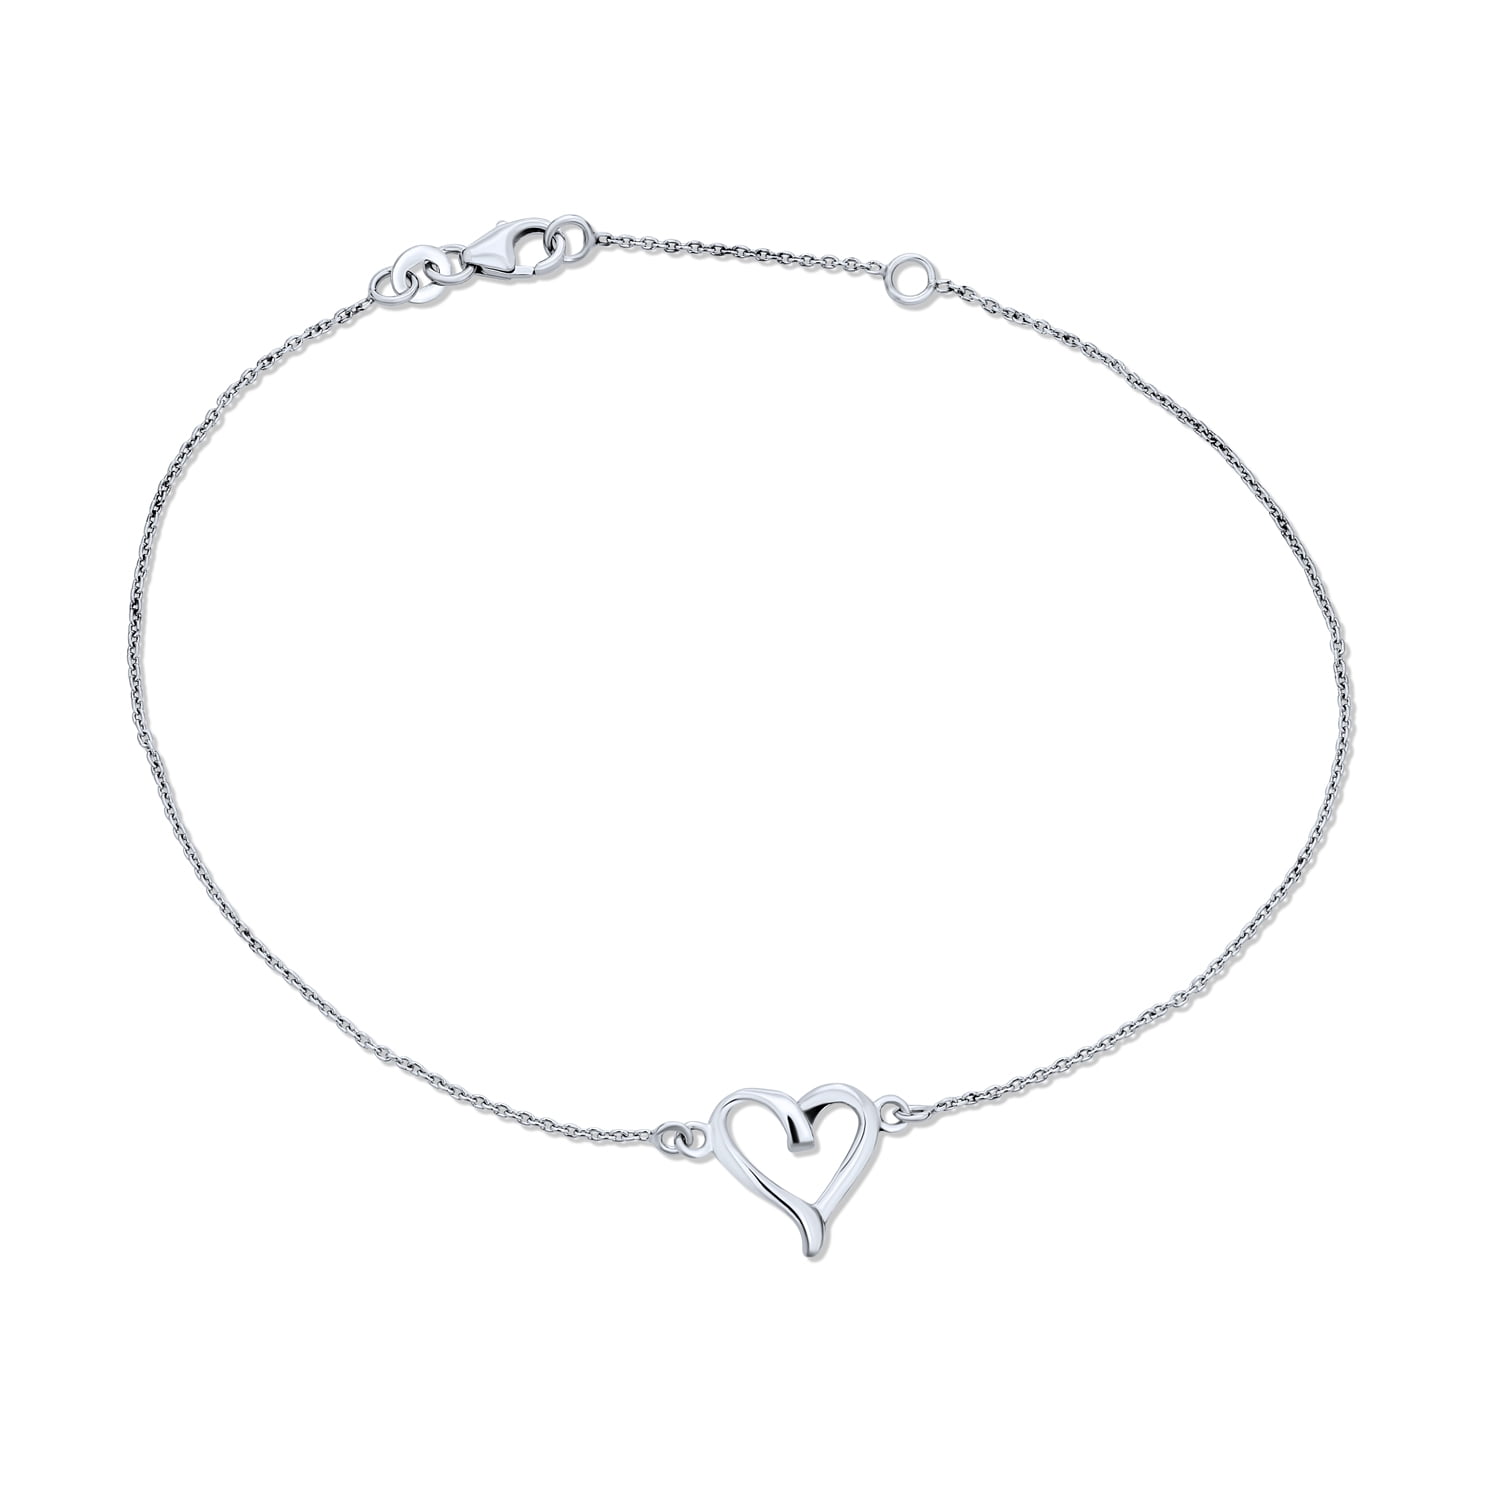 3mm Sterling Silver Bracelet Or Ankle Chain Anklet Heart Charm 7" 8" 9" 10" 11" 